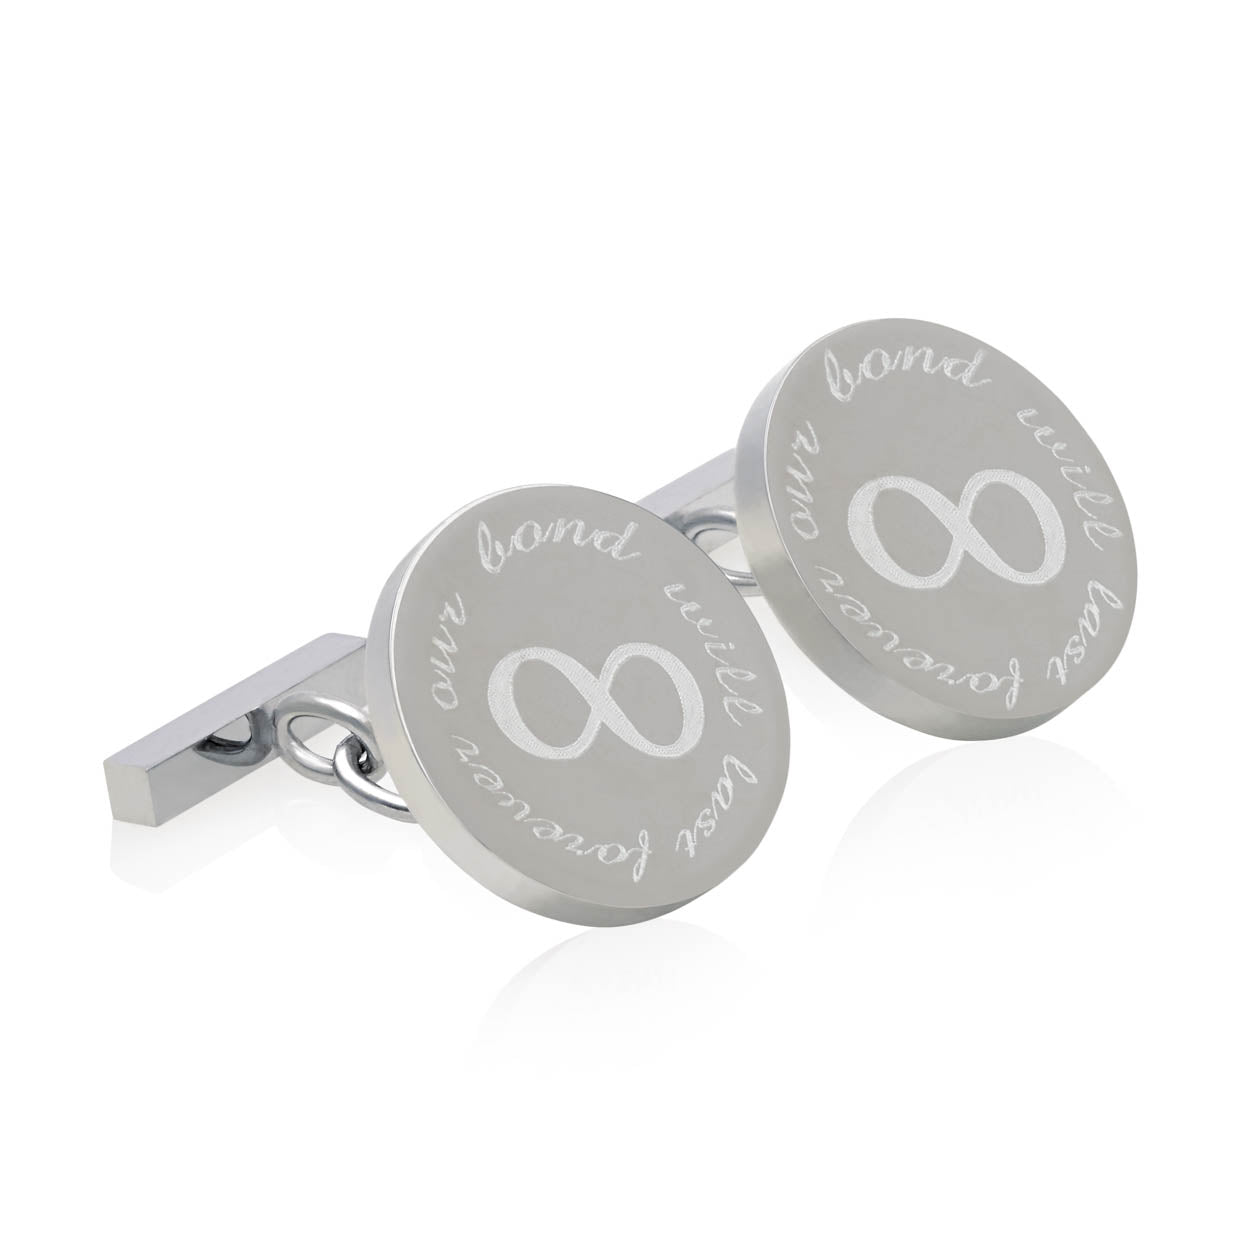 Silver Cufflinks Our Bond Will Last Forever